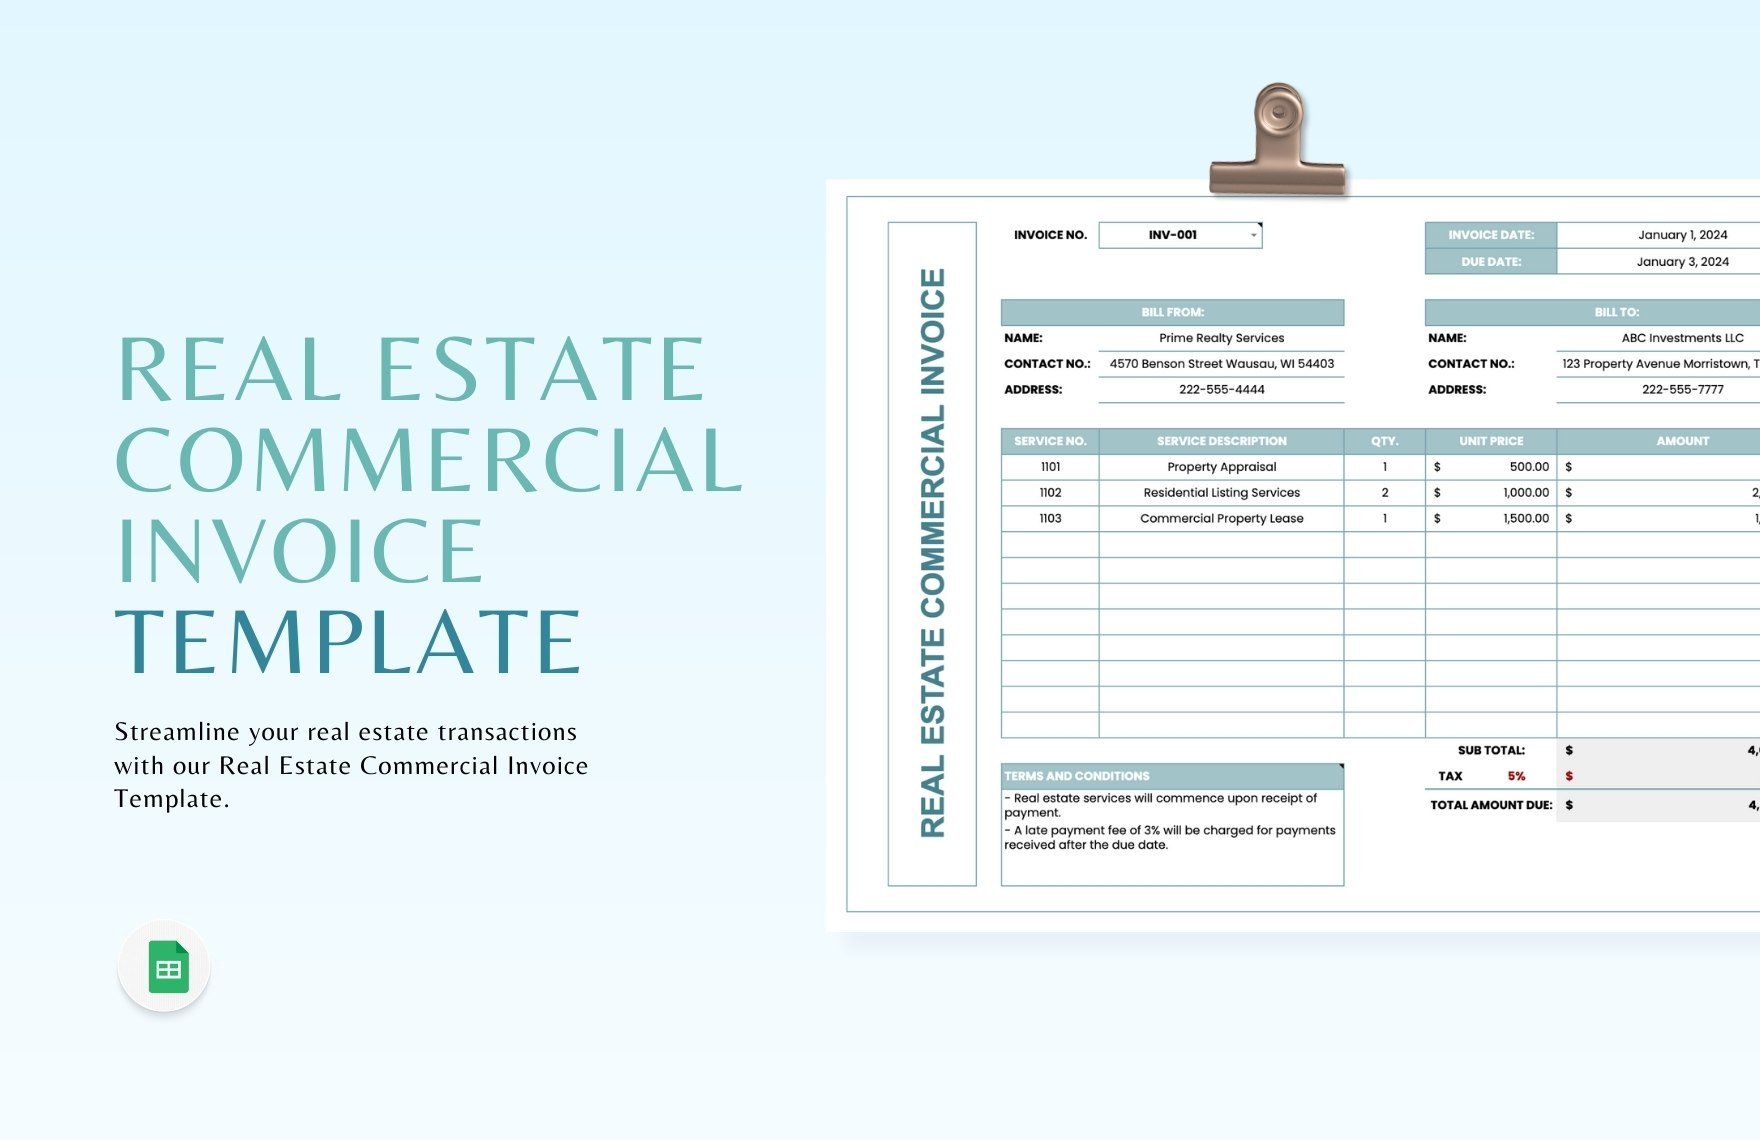 Real Estate Commercial Invoice Template